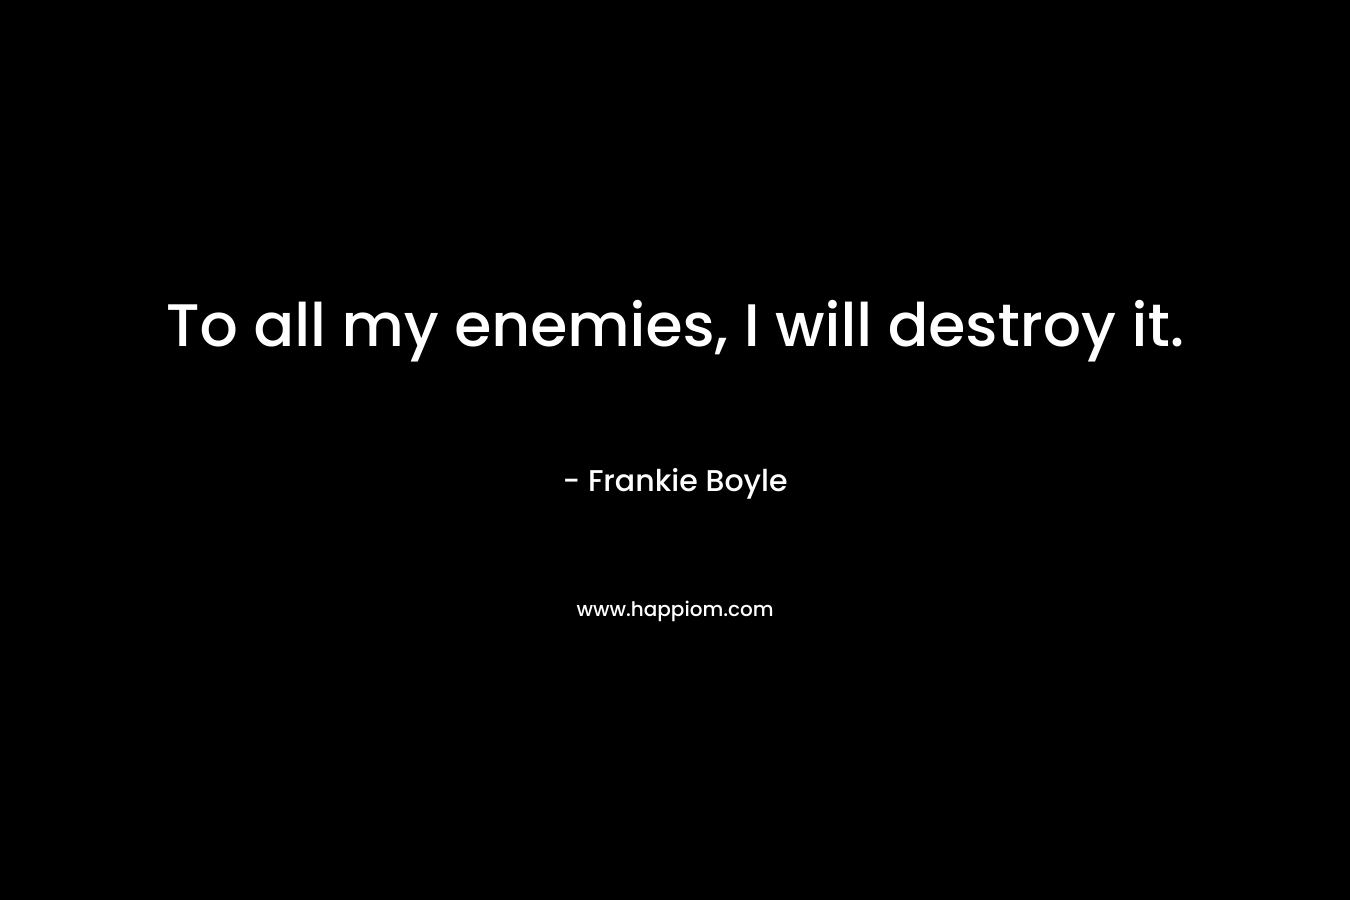 To all my enemies, I will destroy it.